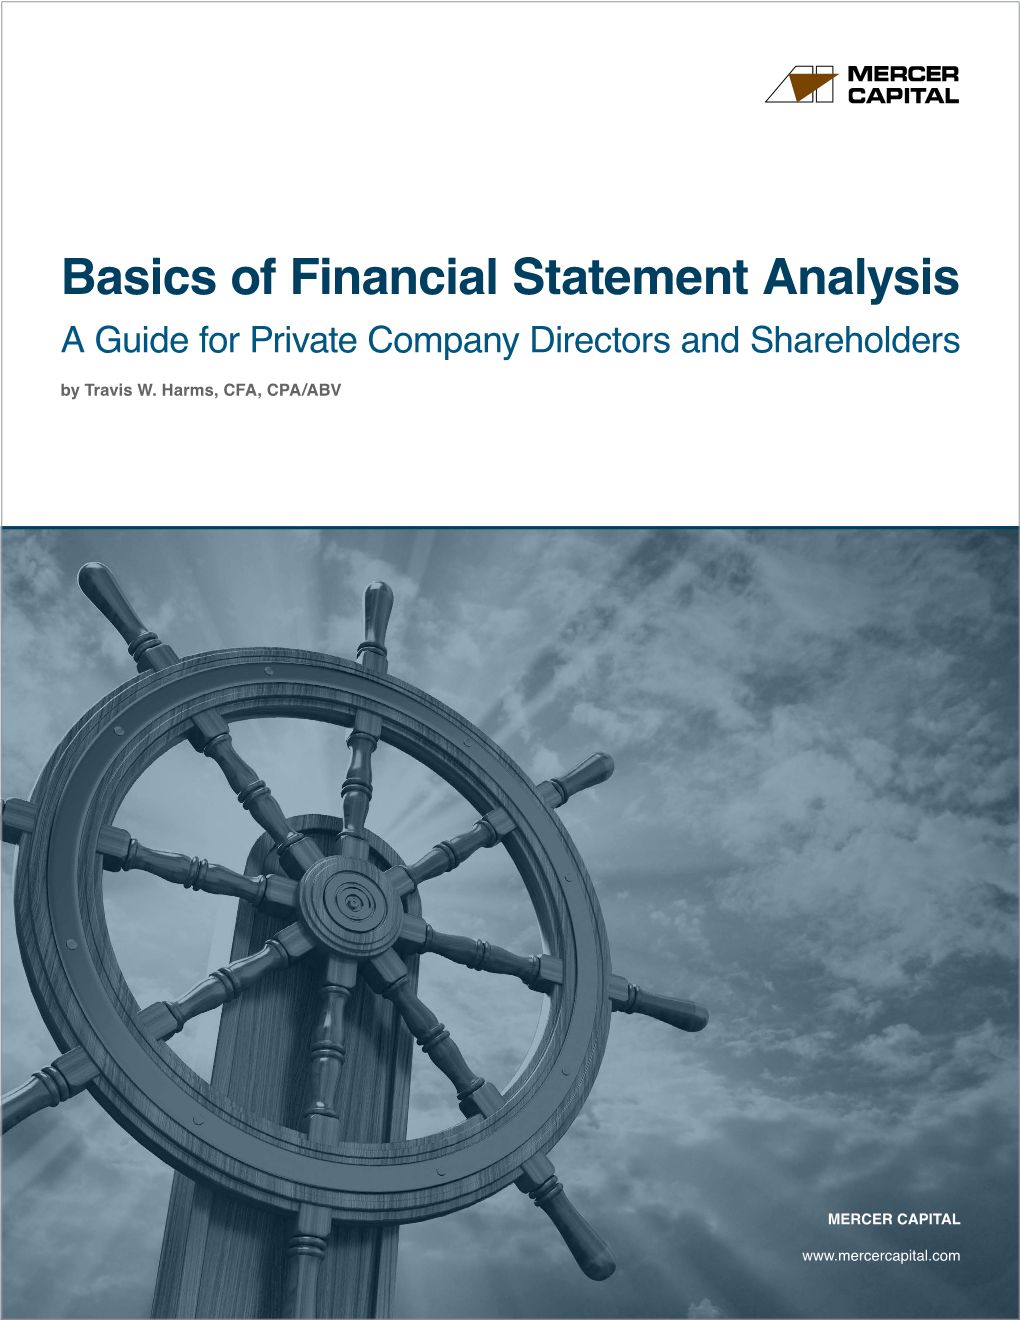 Basics of Financial Statement Analysis a Guide for Private Company Directors and Shareholders by Travis W